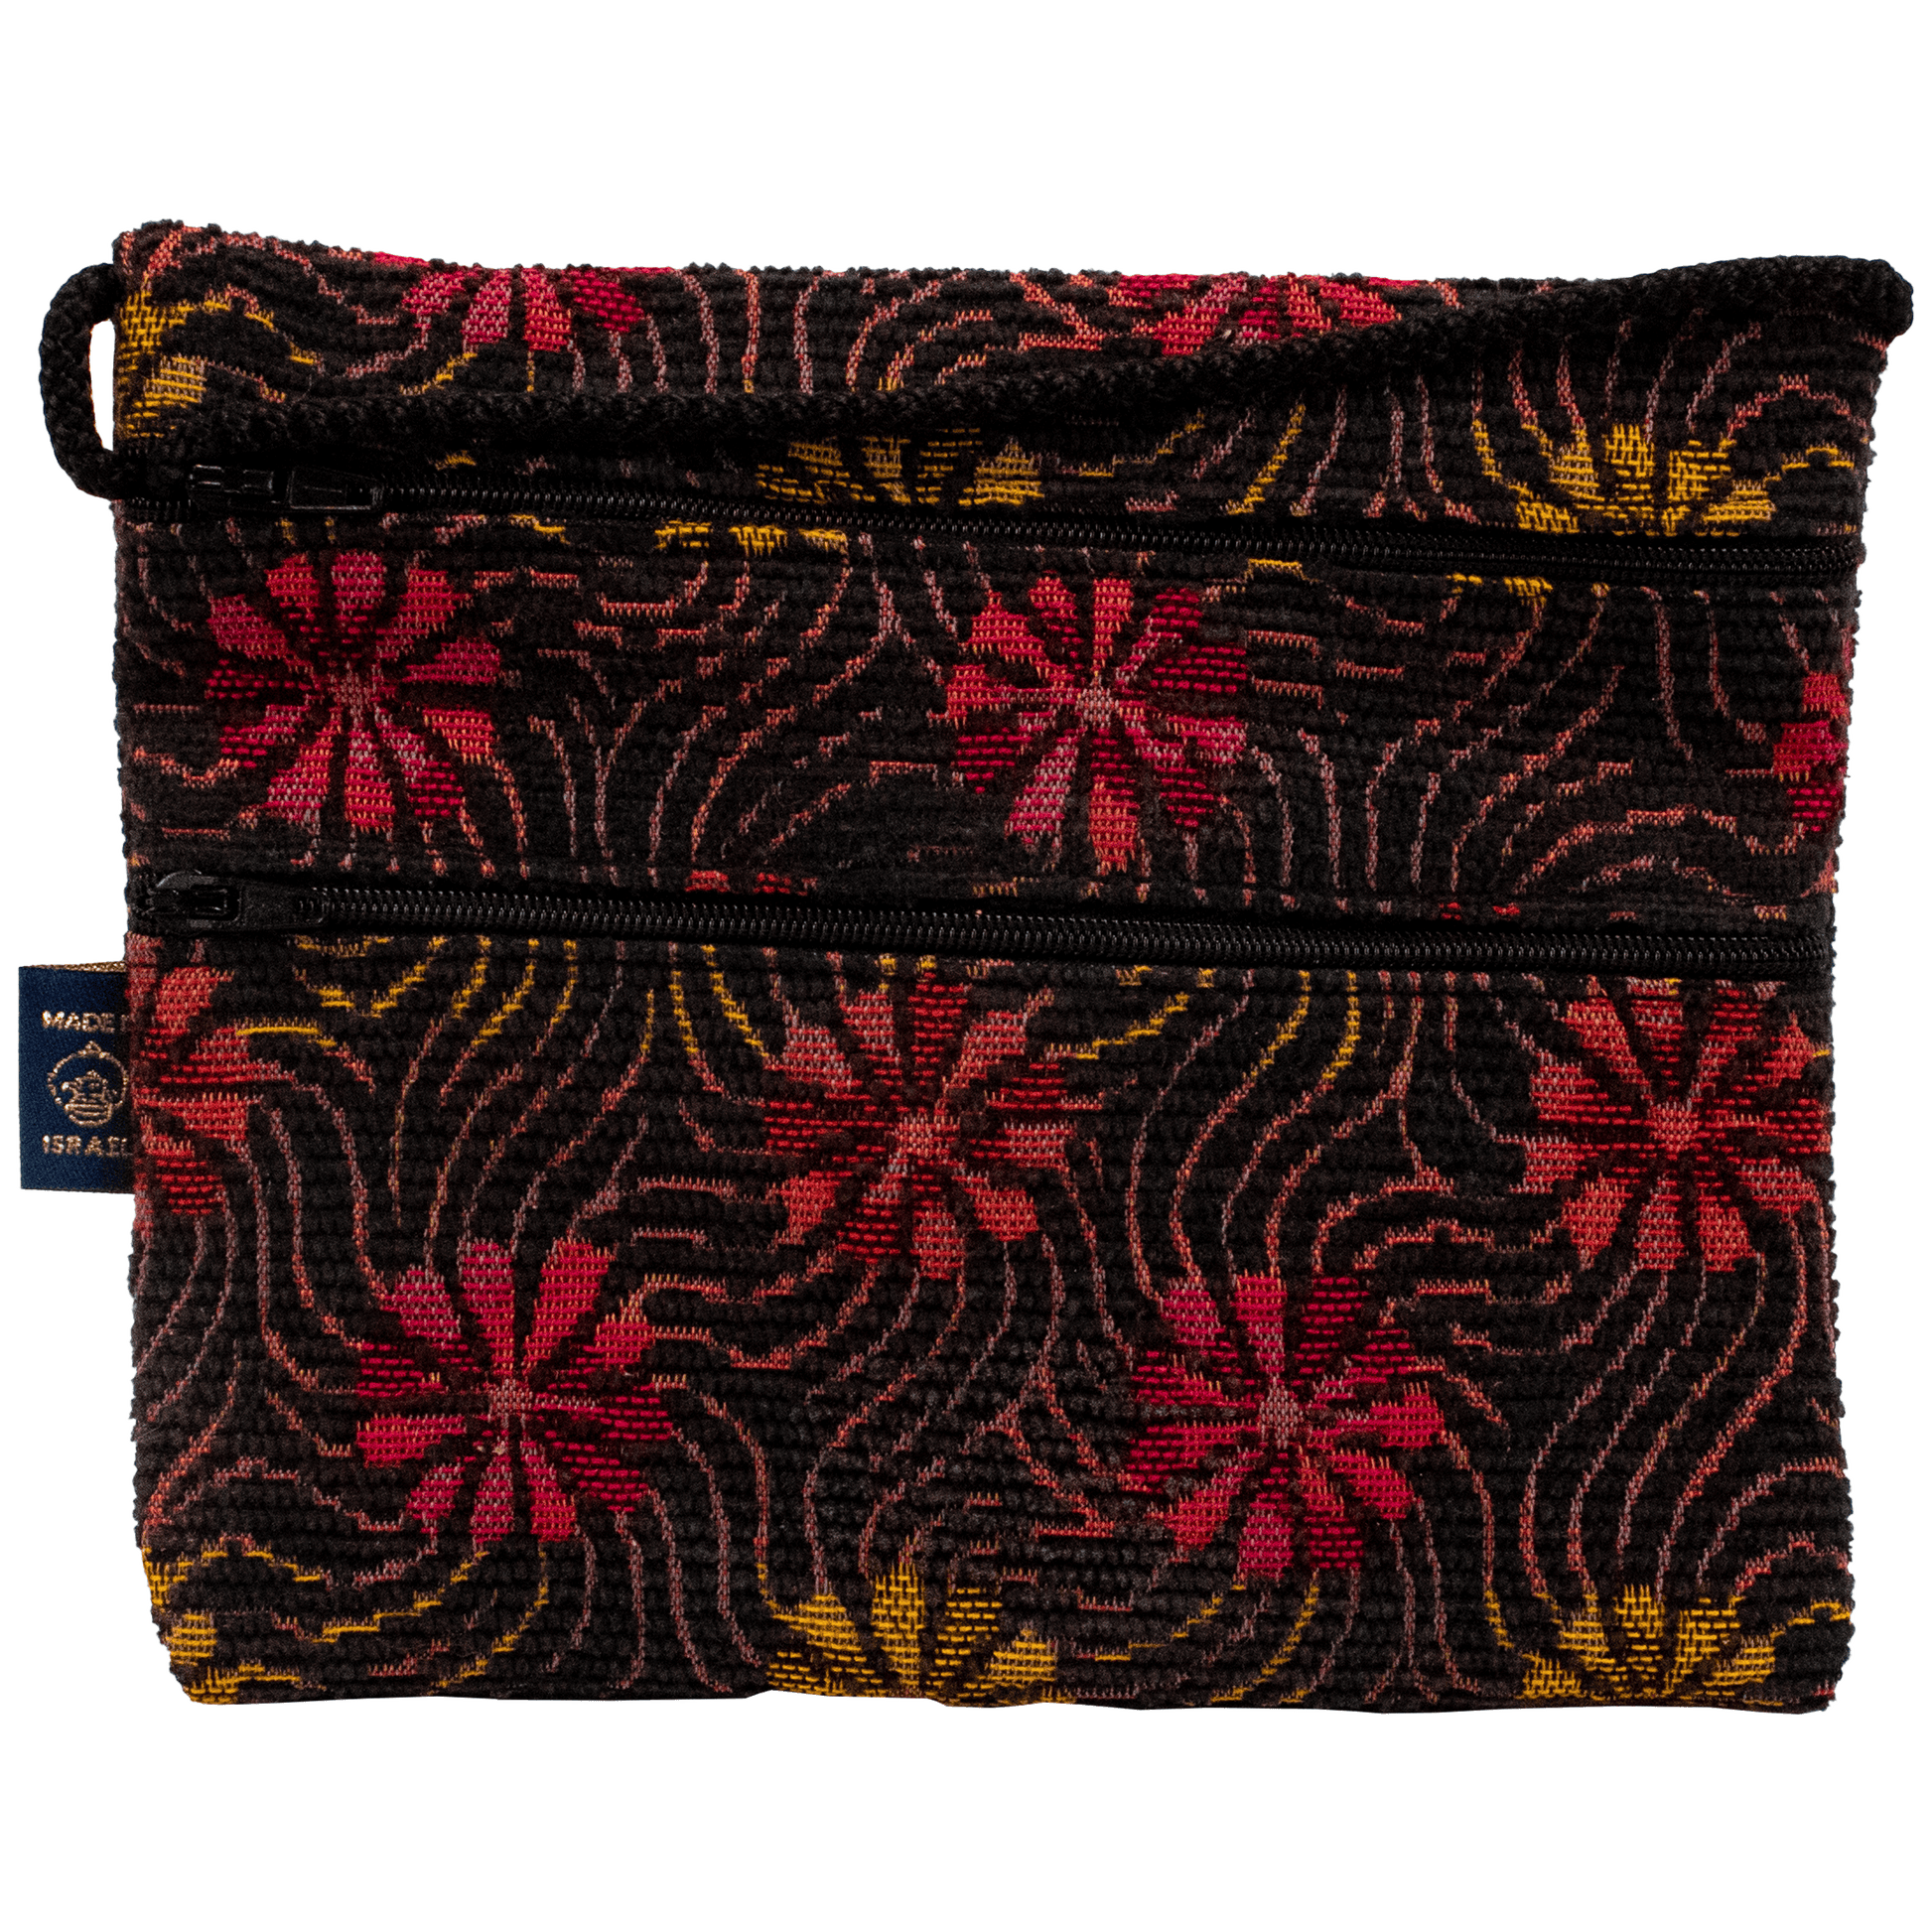 Double Zipper medium Crossbody bag with colorful whimsical floral pattern black bag